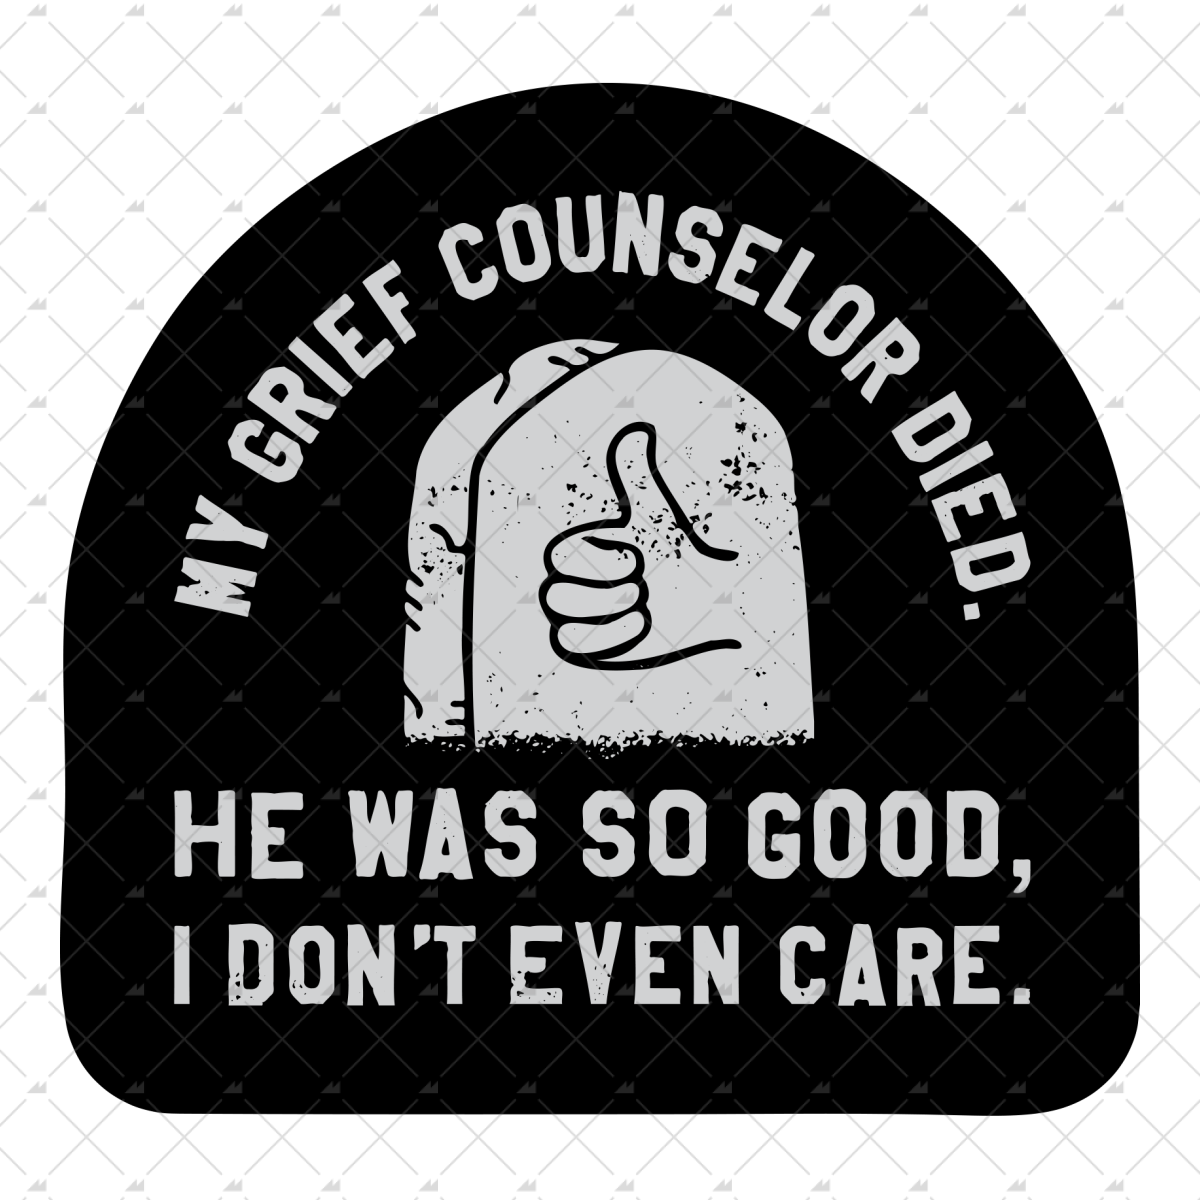 My Grief Counselor Died - Sticker